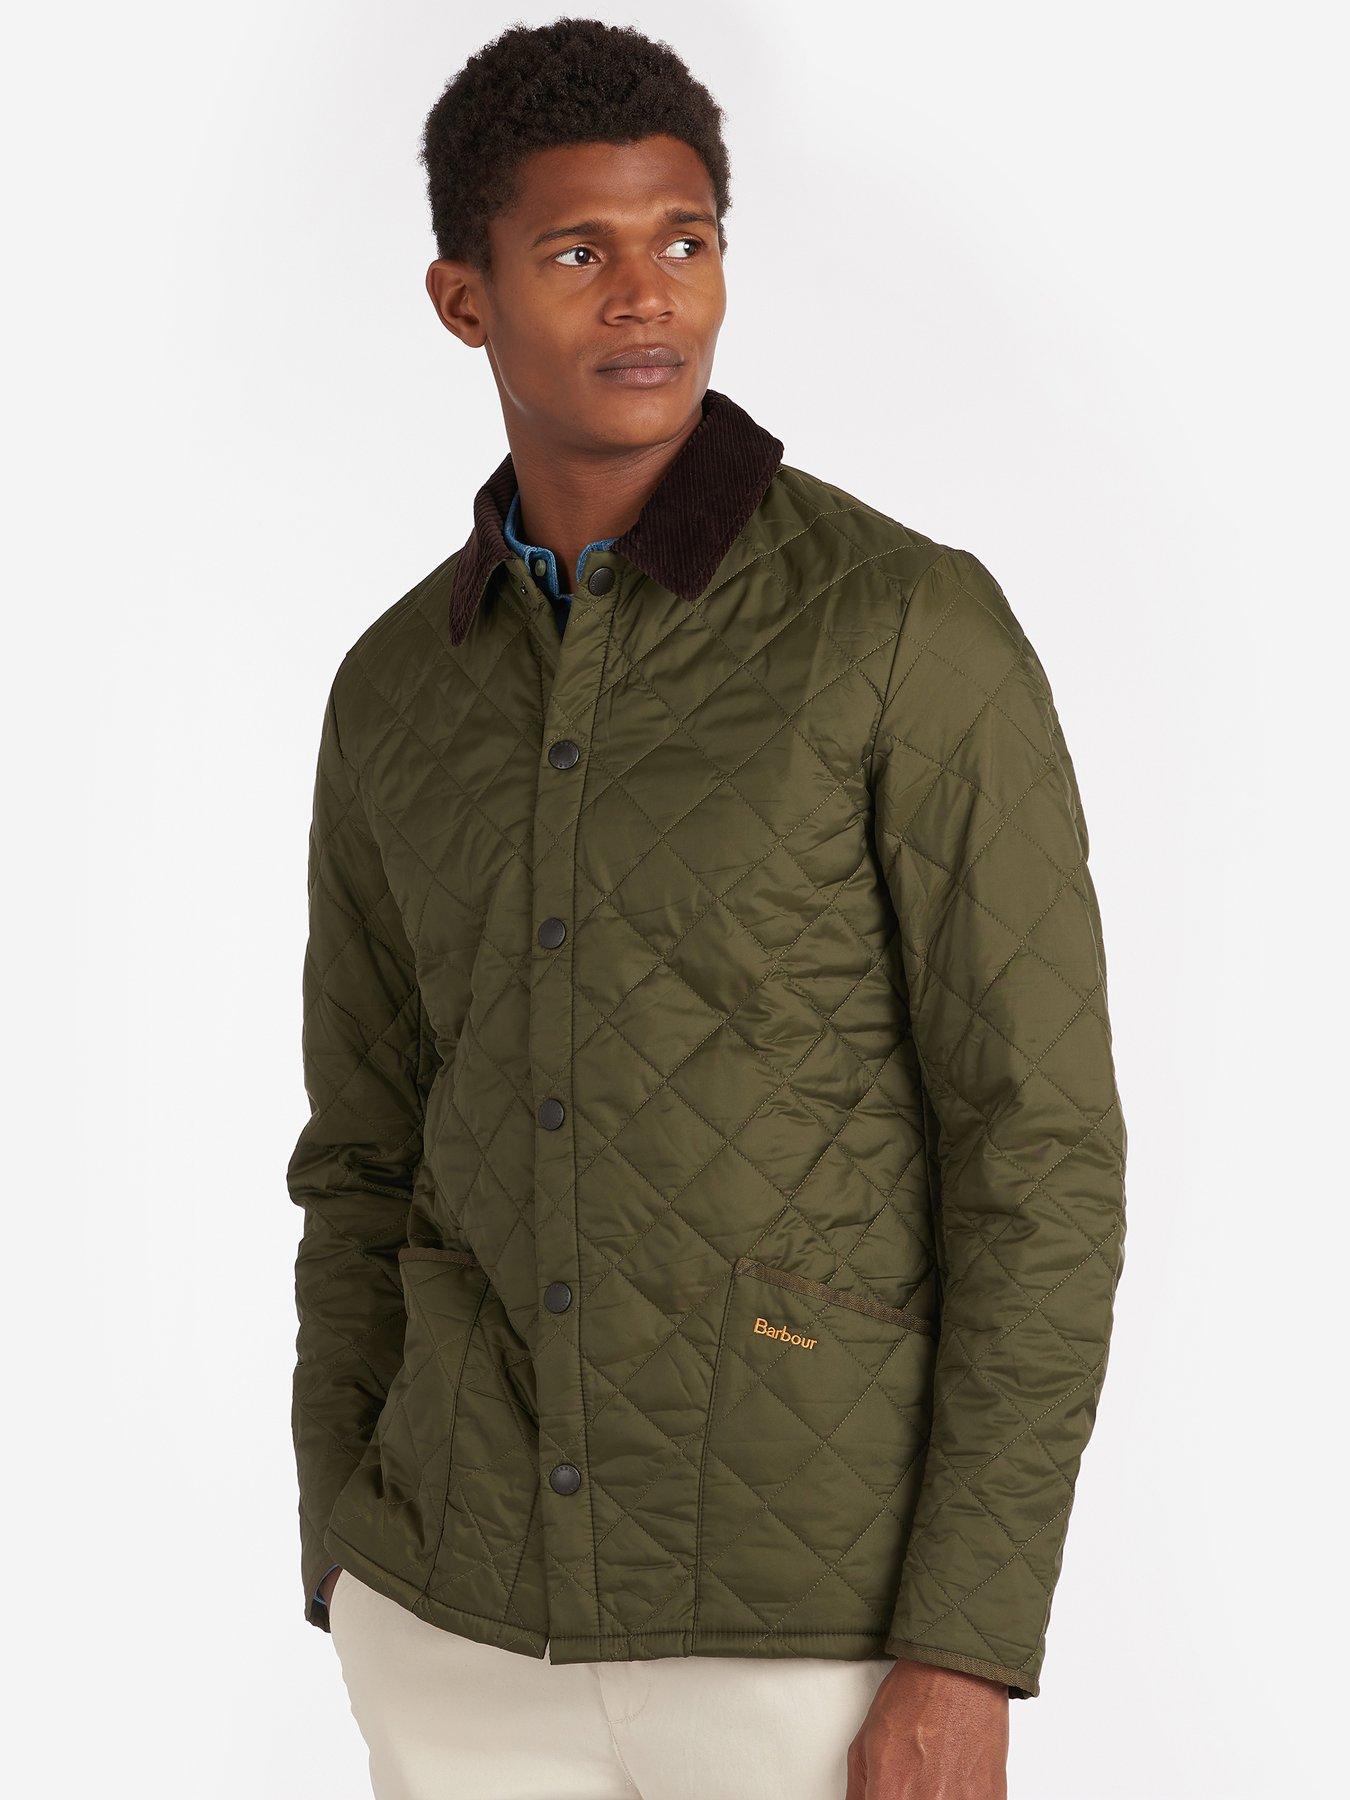 barbour liddesdale review